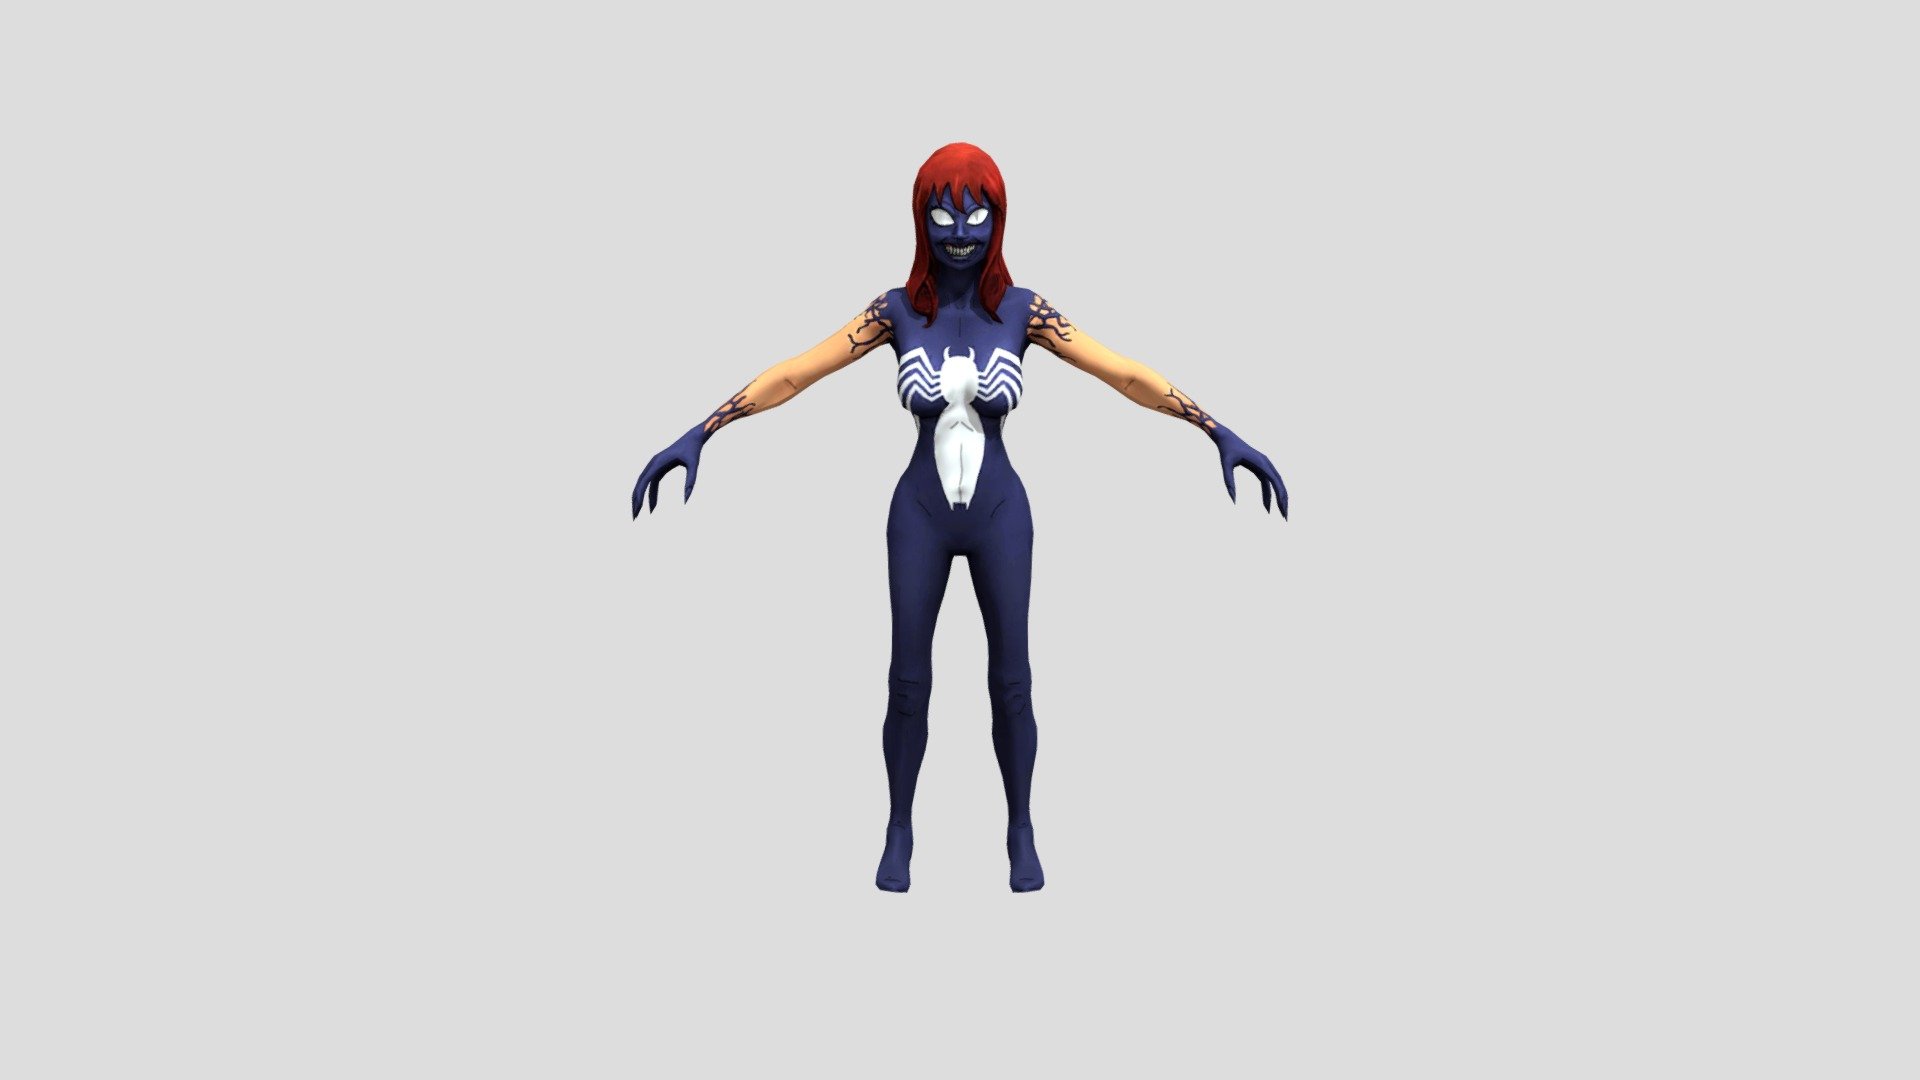 Here’s Another Model of MJ from Spider-man Unlimited Android in her Venom Costume Enjoy!

Disclaimer I Do Not own this model or Spider-man Unlimited Android They are Both owned by Marvel Comics and Gameloft Please Support the official release 3d model